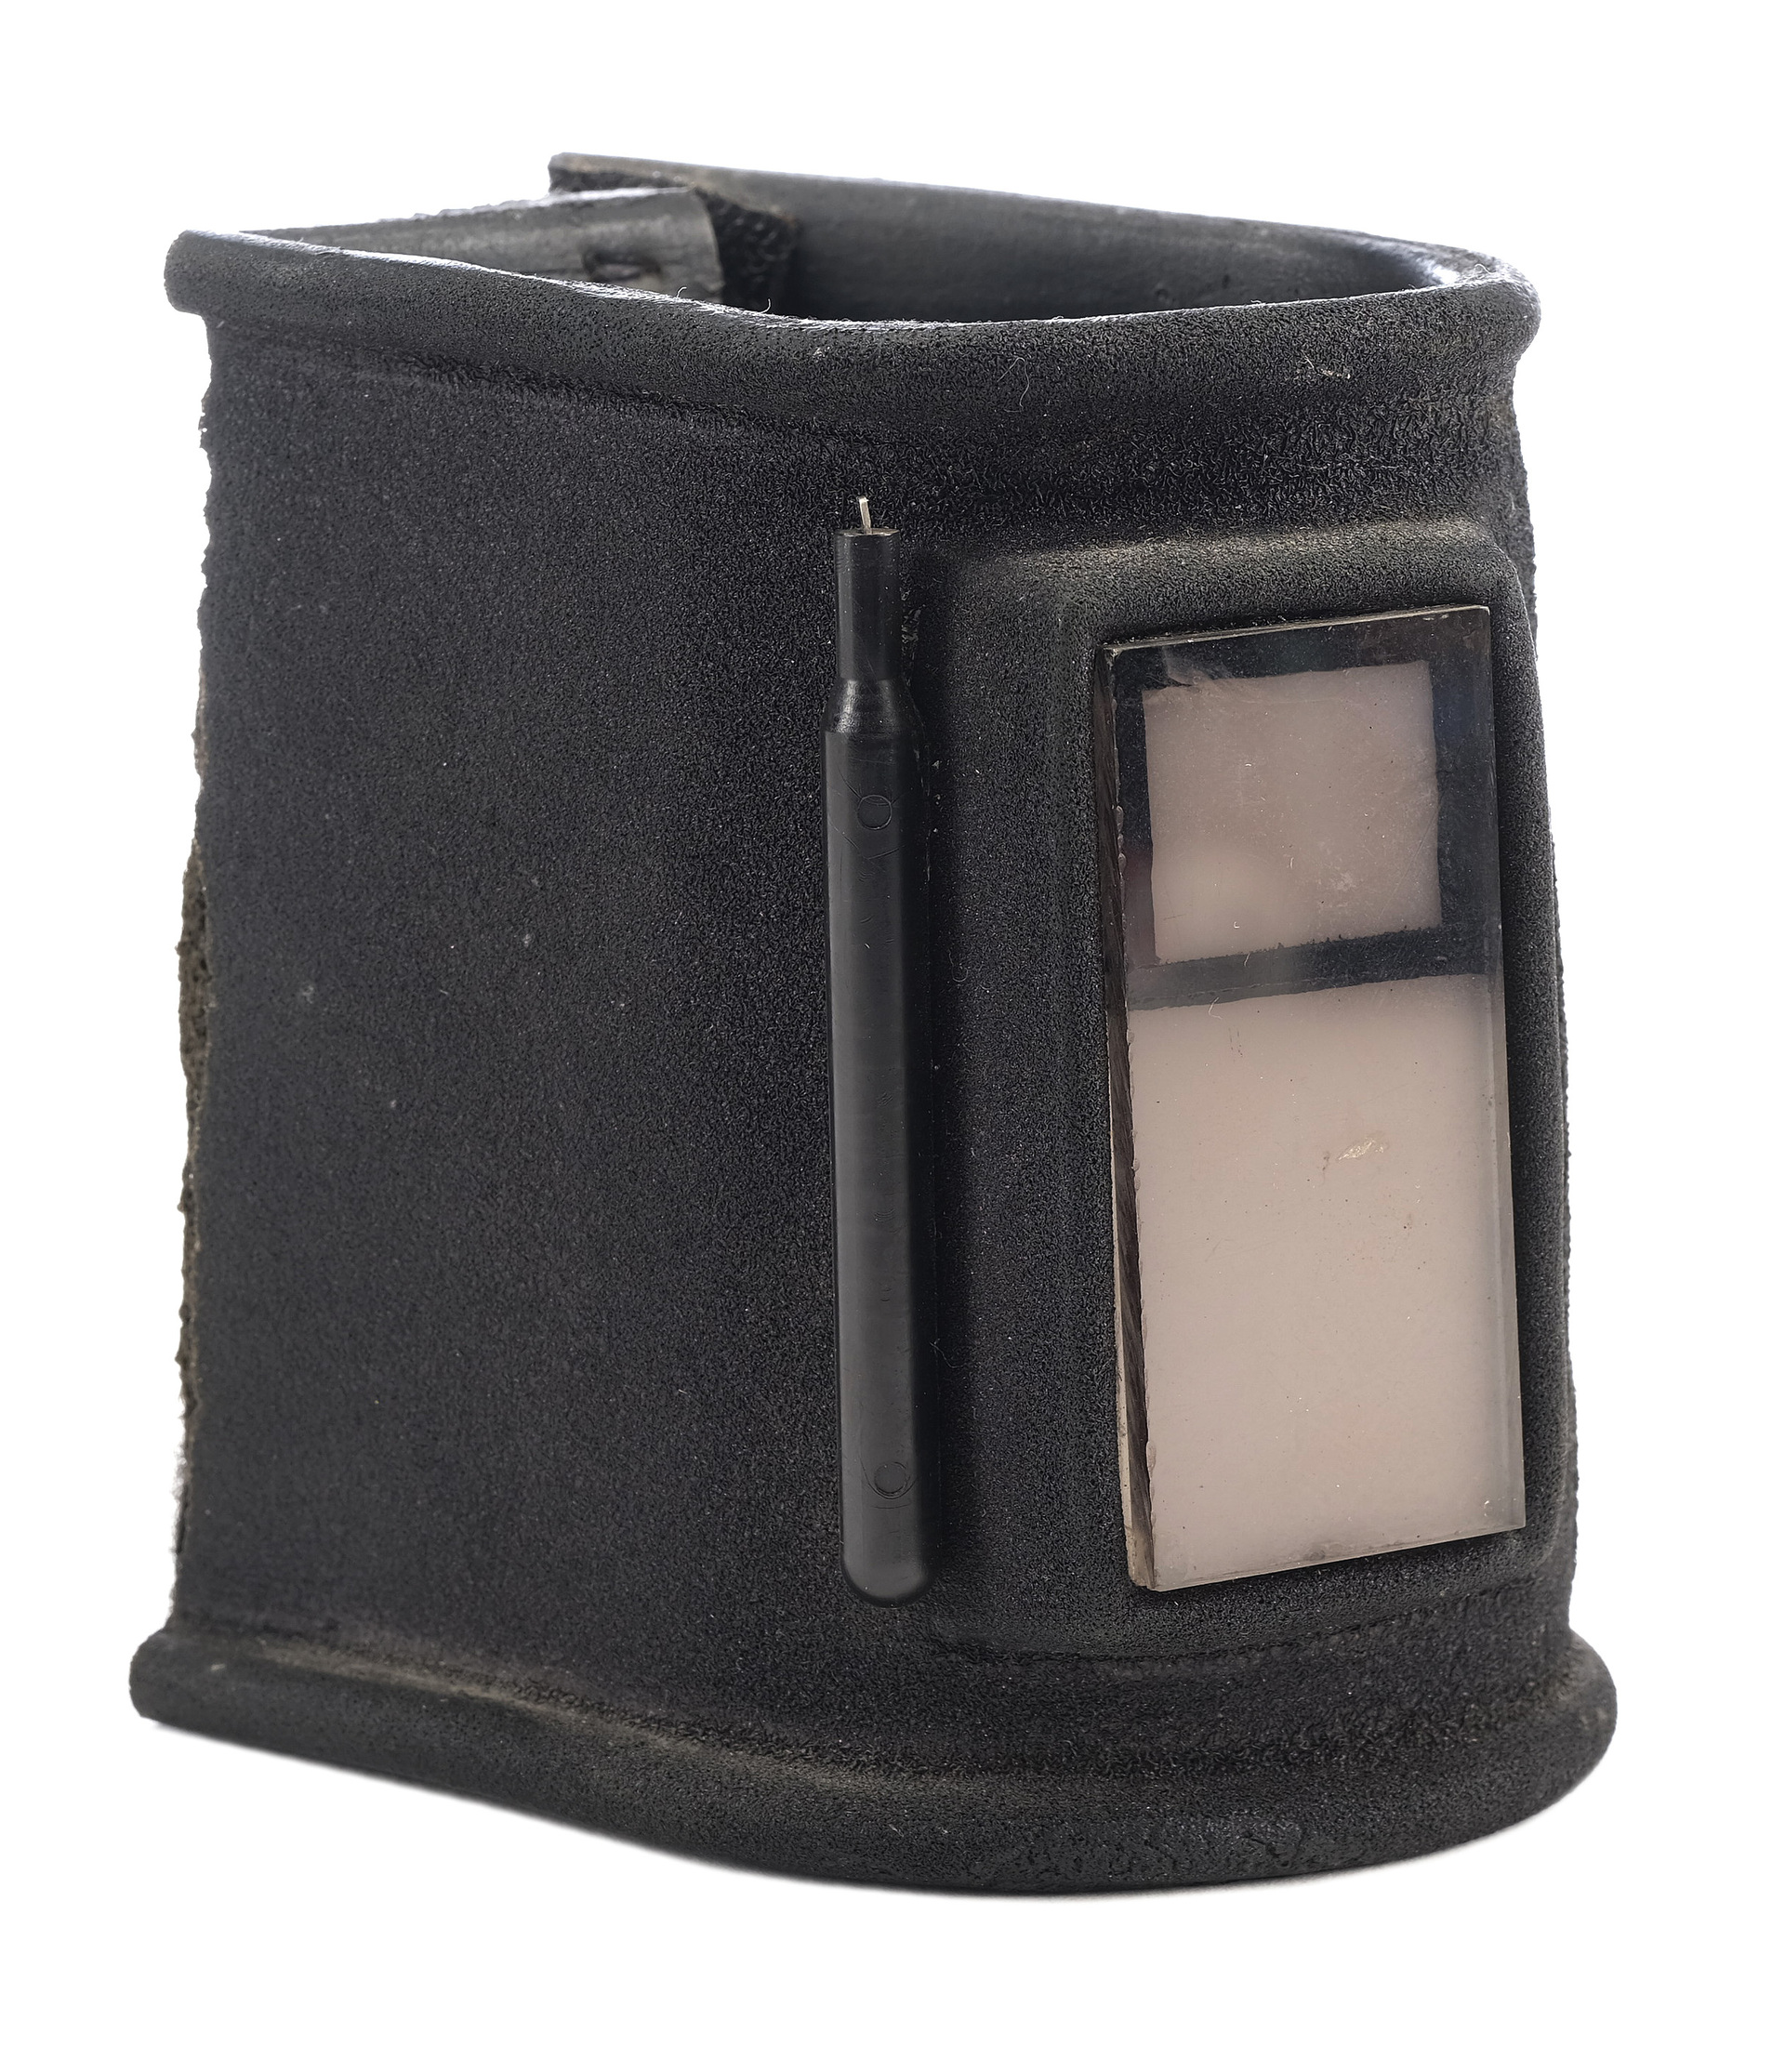 BACK TO THE FUTURE PART II - Police Wrist Communicator - Image 3 of 6